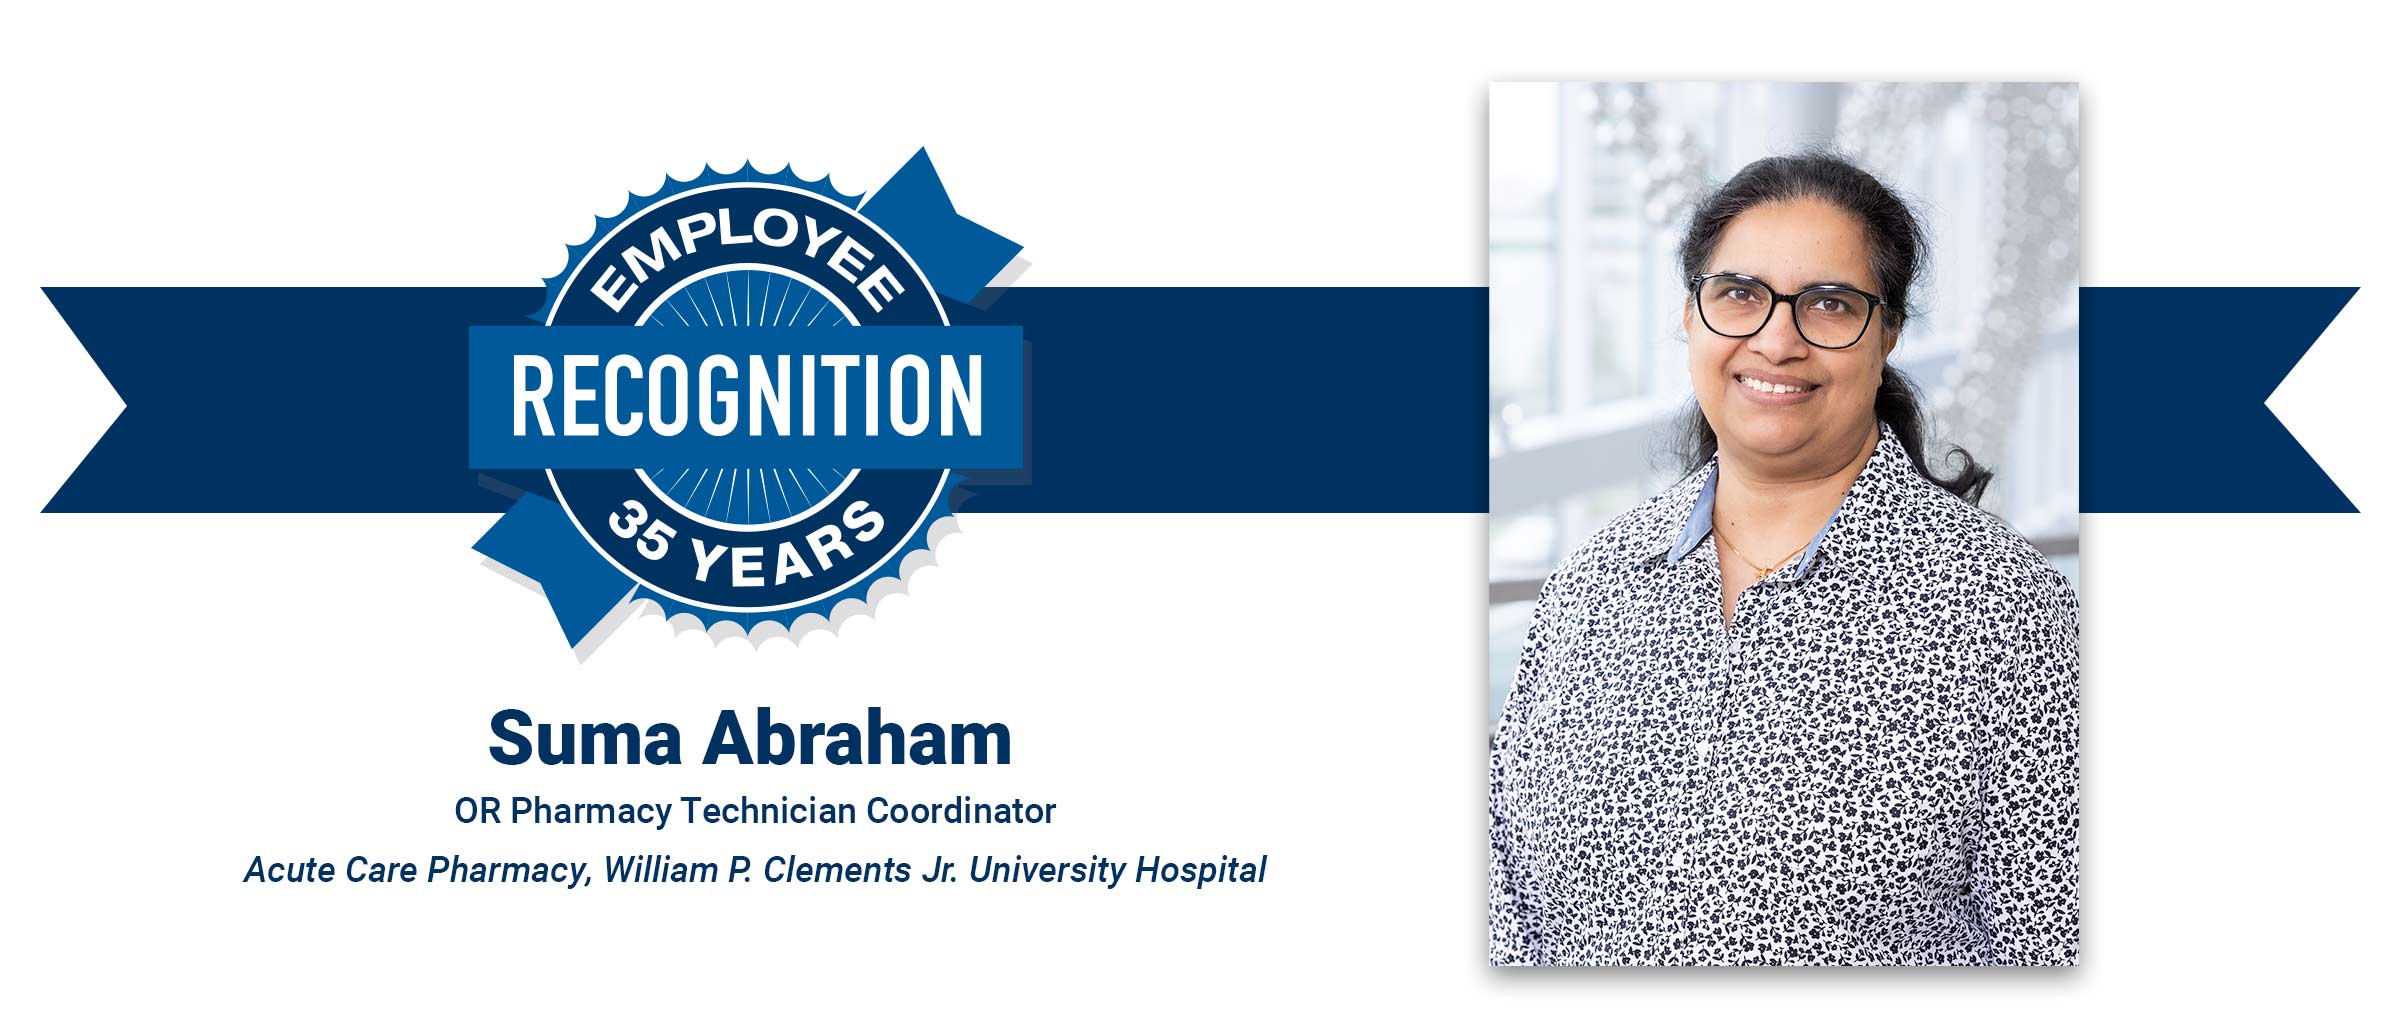 Woman with glasses, black hair, wearing spotted collared shirt. Suma Abraham, 35 years employee recognition